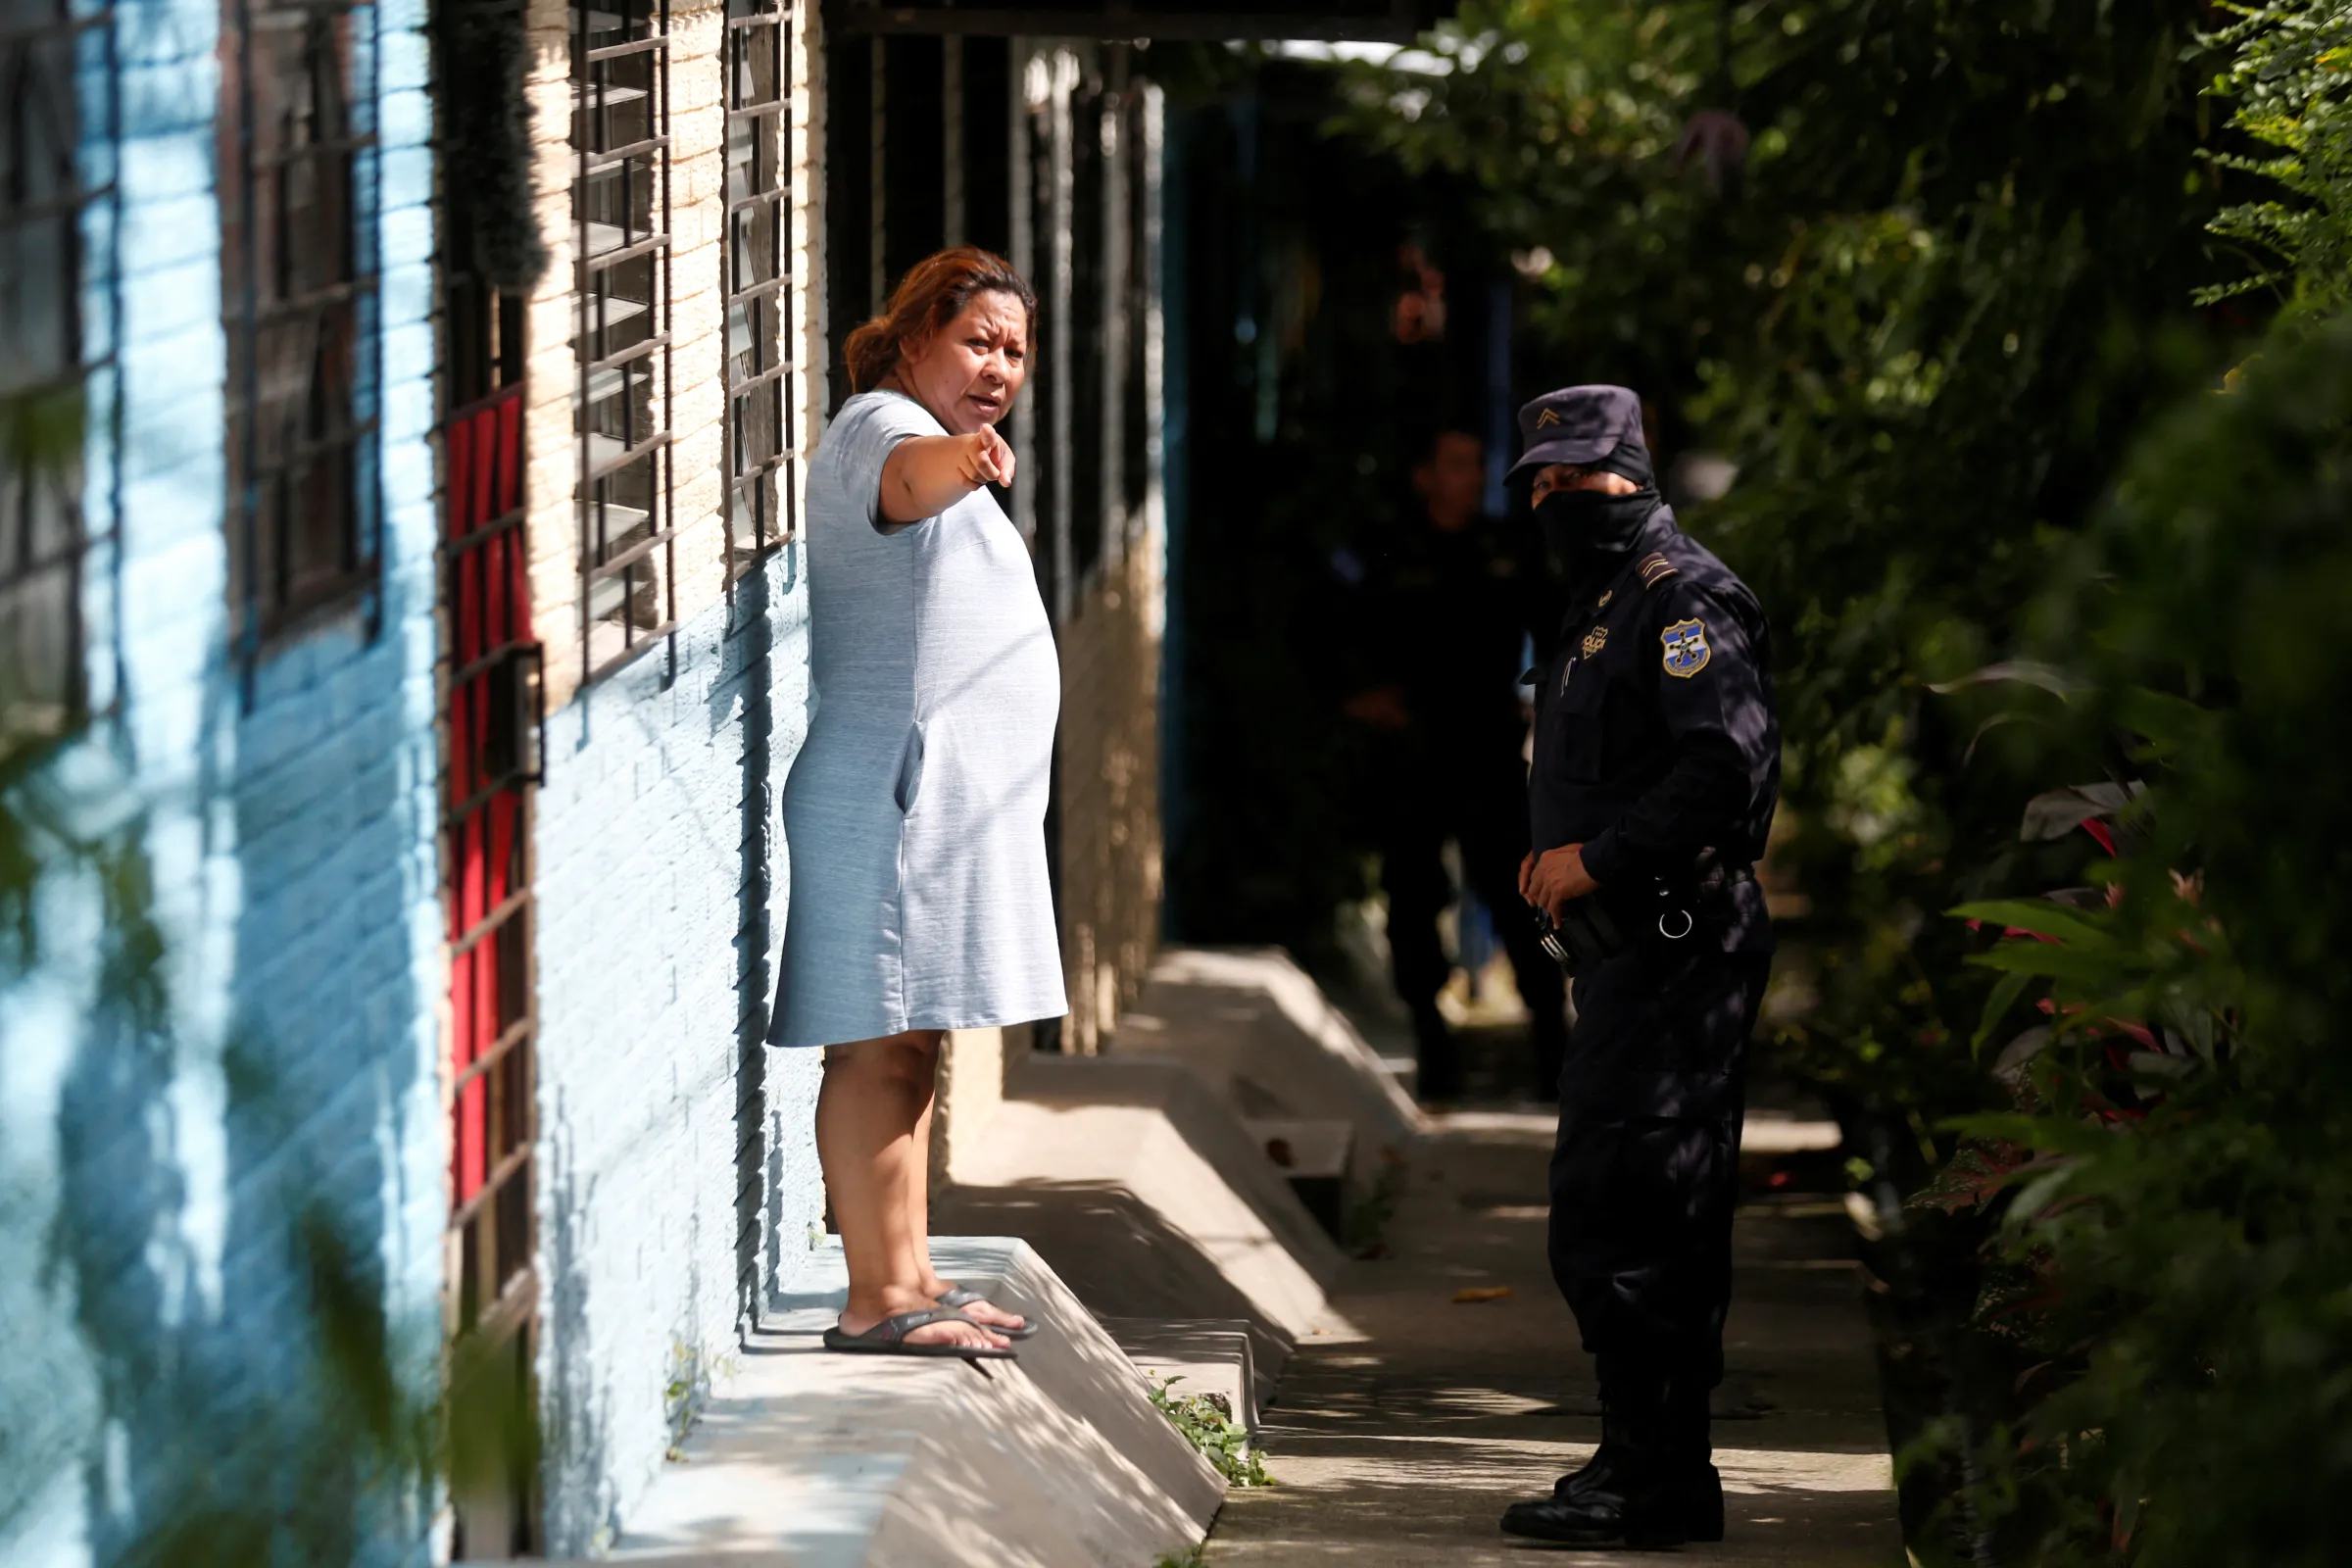 Police officer talks with a woman during a "Casa Segura" (Safe House) operation as part of the state of emergency to fight gangs